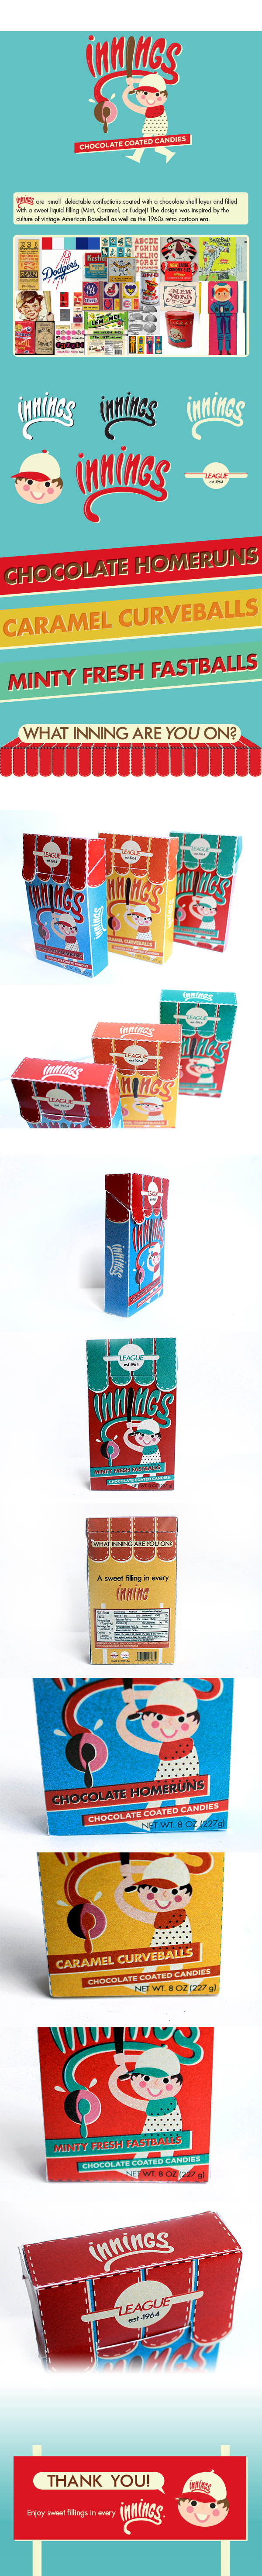 packaging design Candy chocolate baseball retro design Retro chocolate packaging Vintage Packaging Vintage Baseball cute